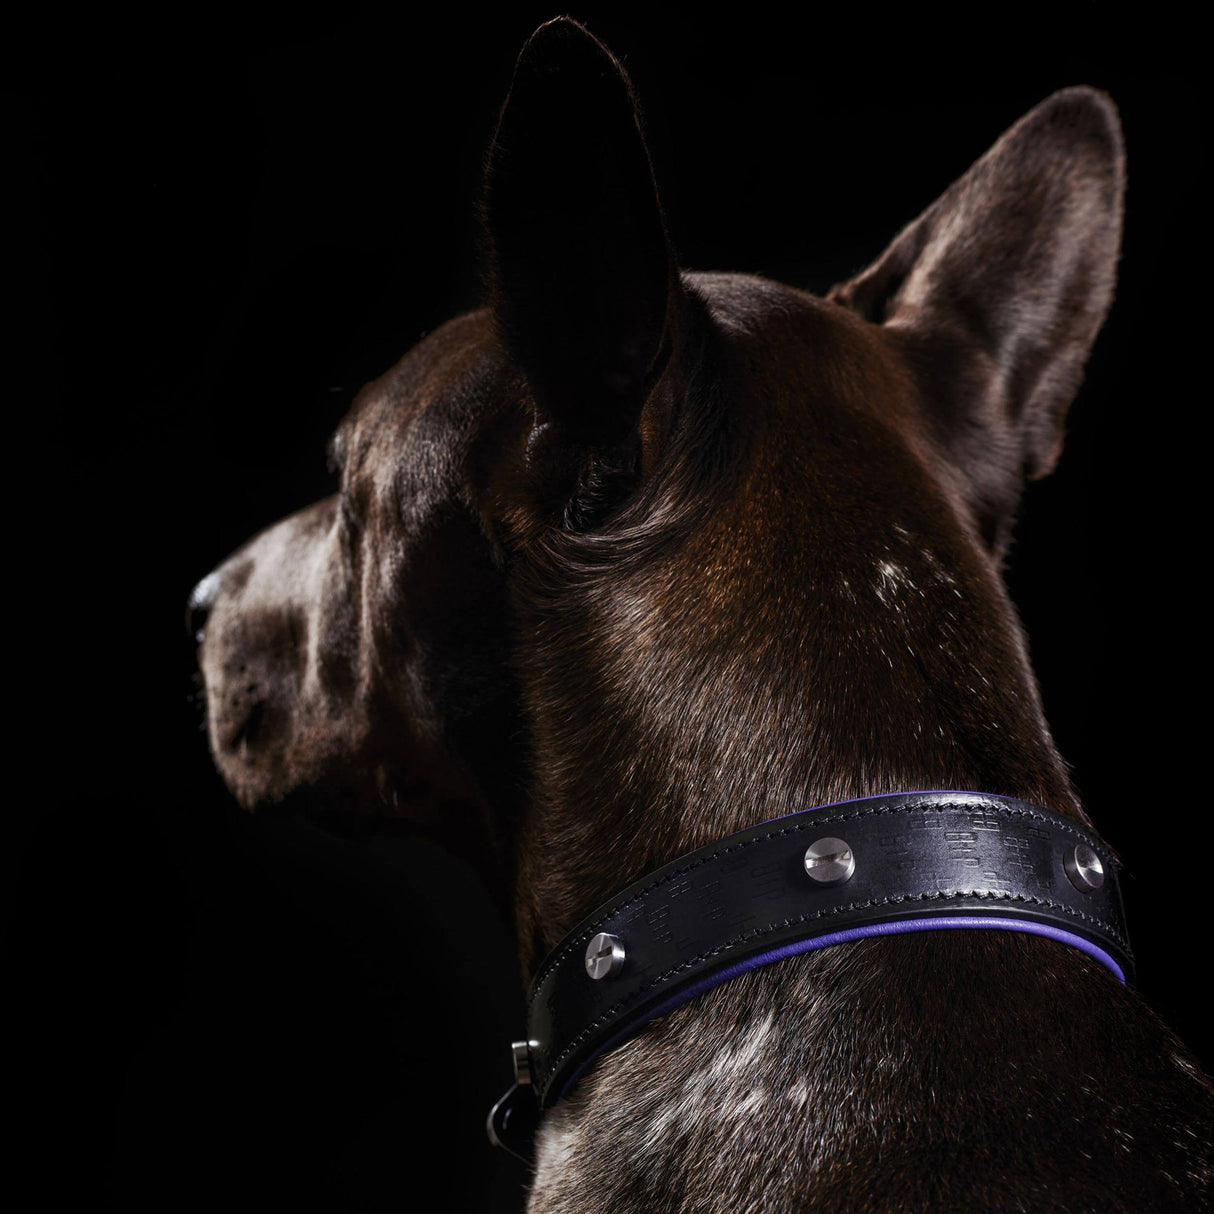 Buster Black and Purple Dog Collar